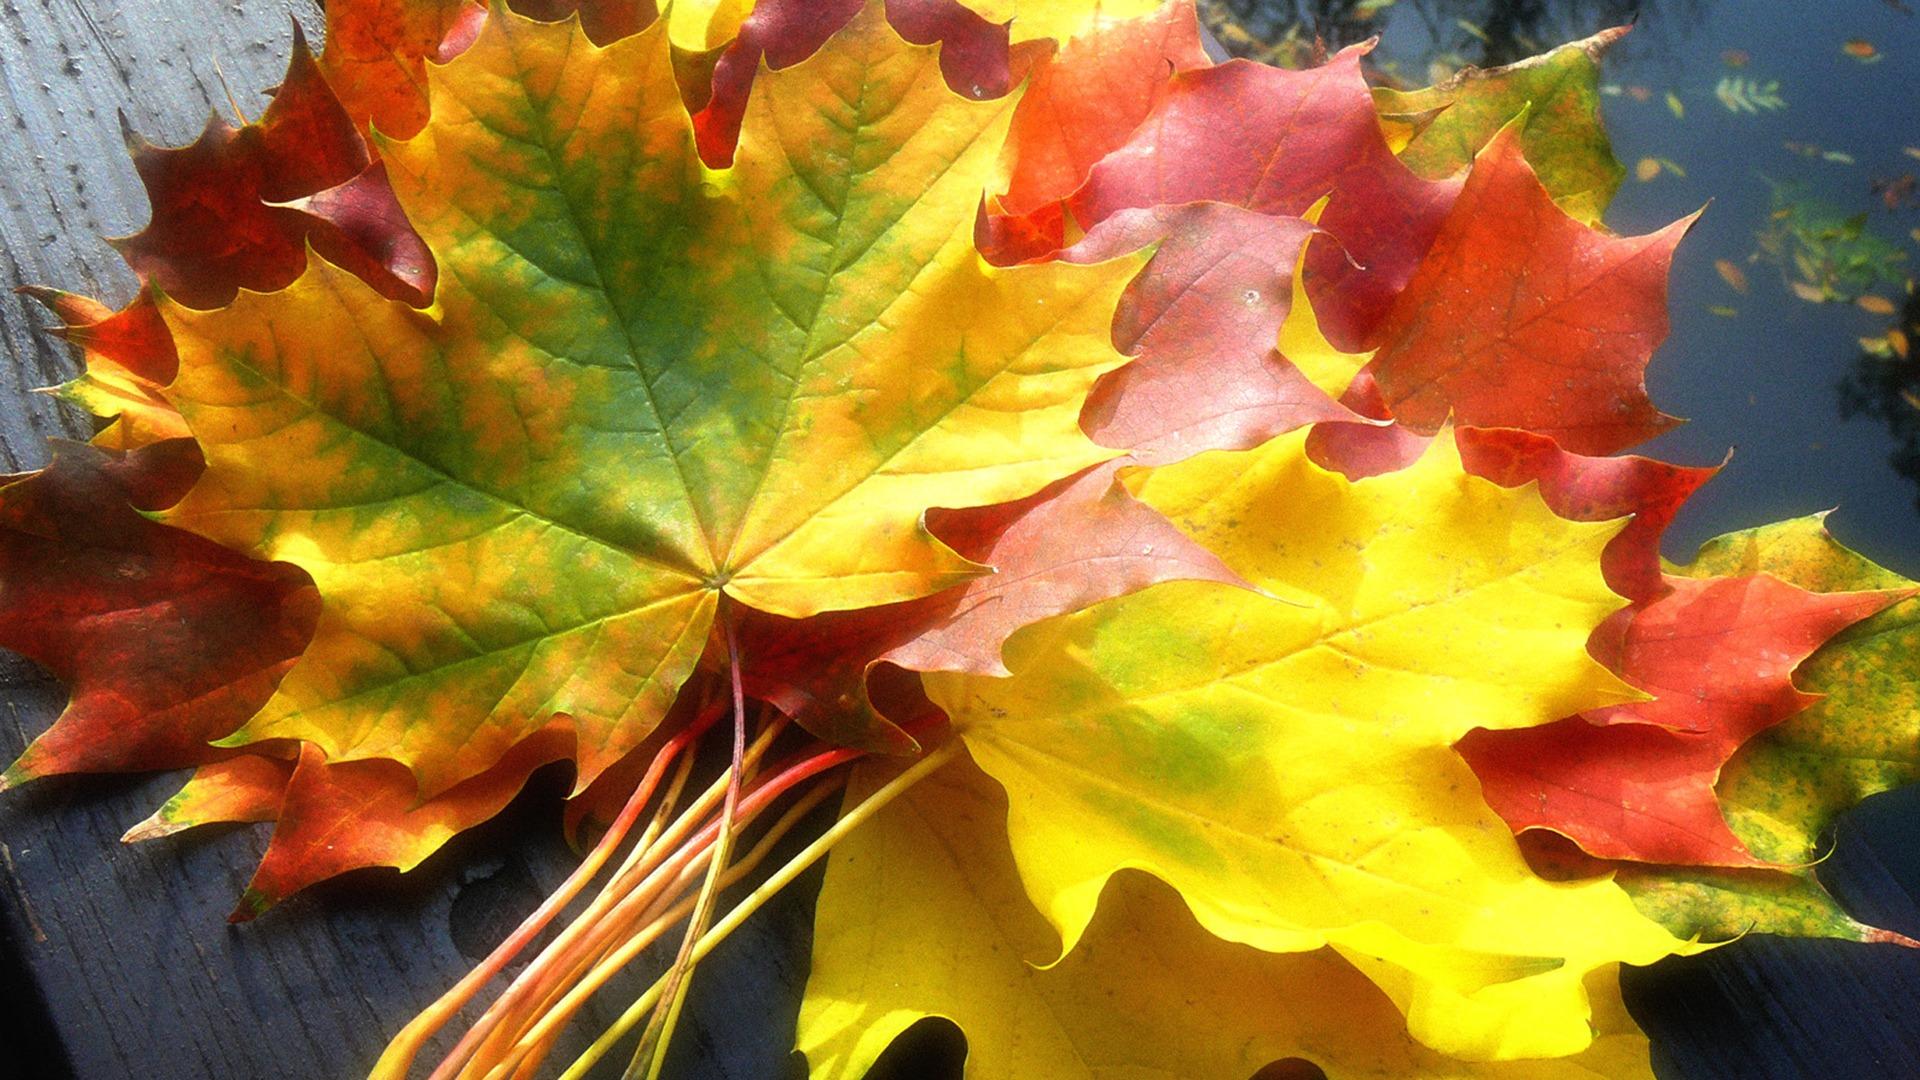 Autumn Seasons Nature wallpapers Collection